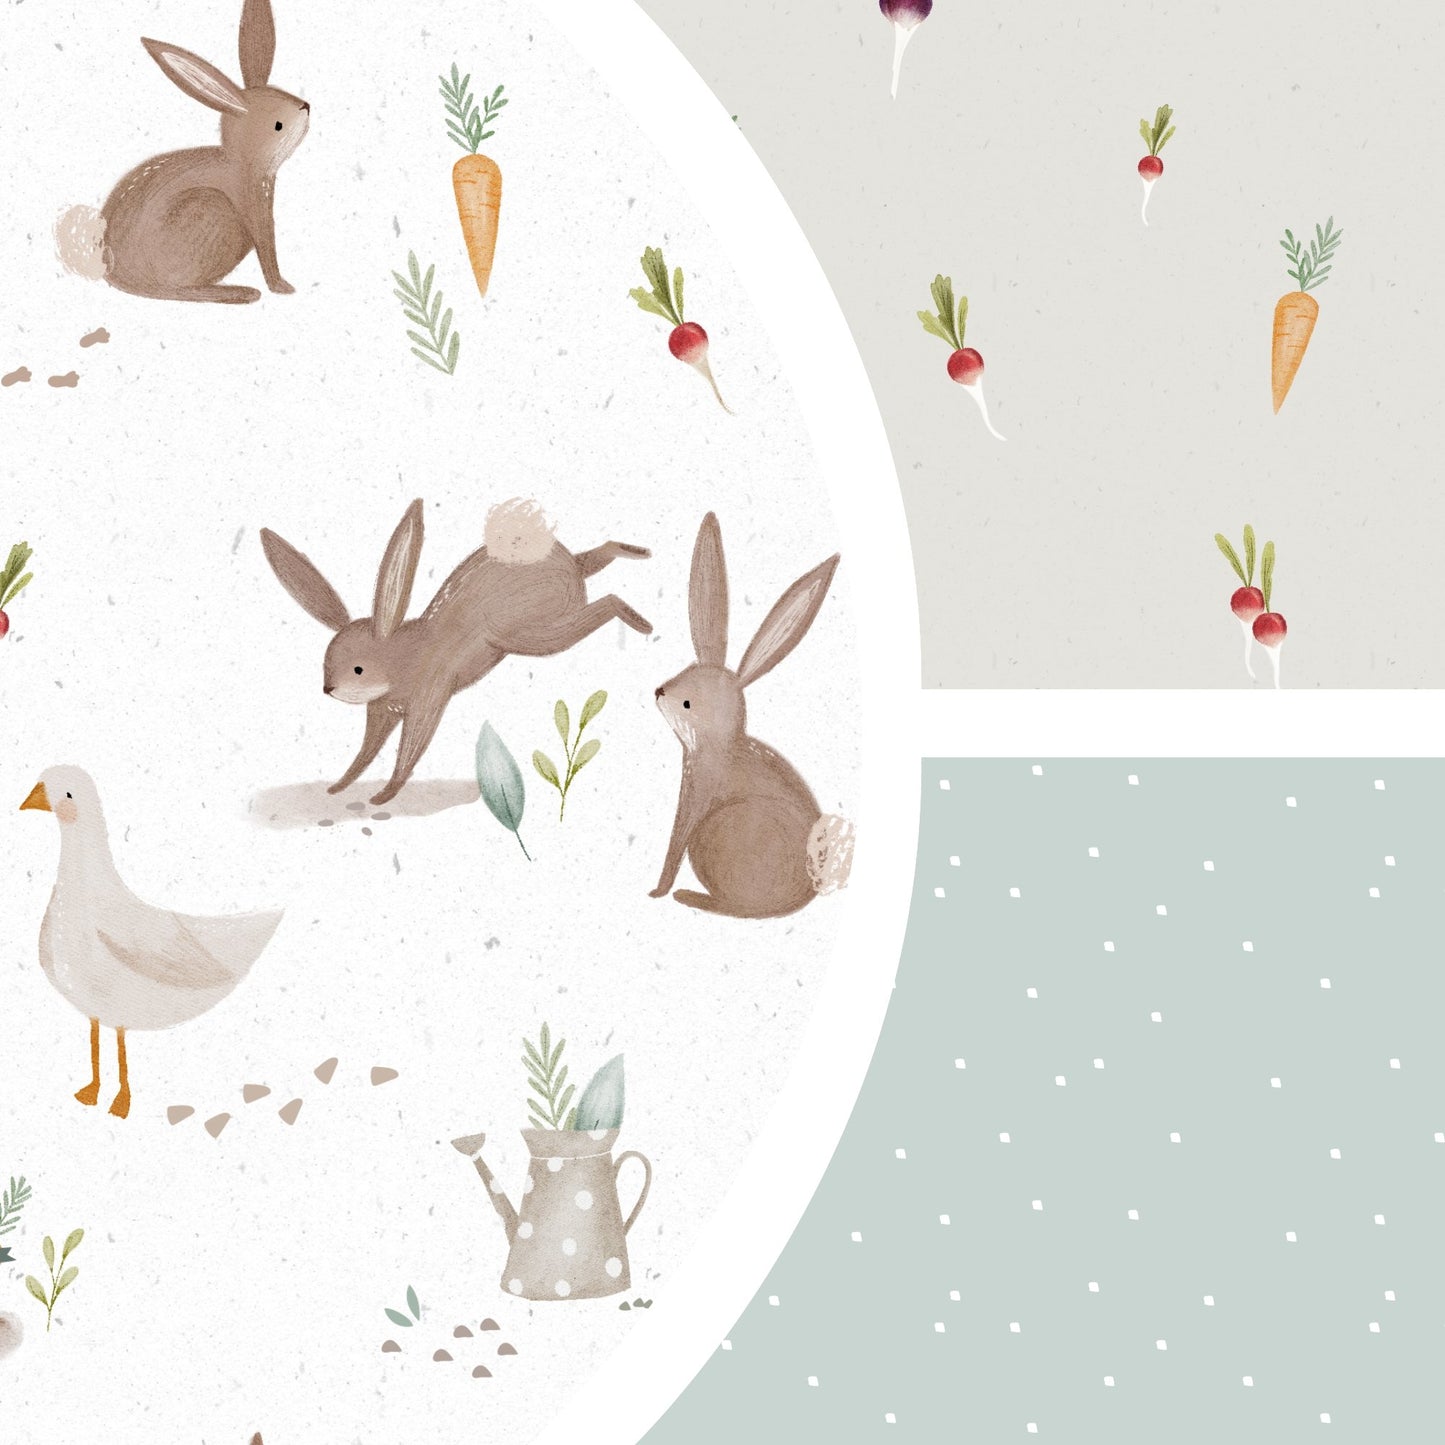 Lumelo and Ginger - Cotton - Cottontail Coordinating Fabric - Mixed Vegetables - Carrot - Turnip - Radish - Little Rhody Sewing Co.